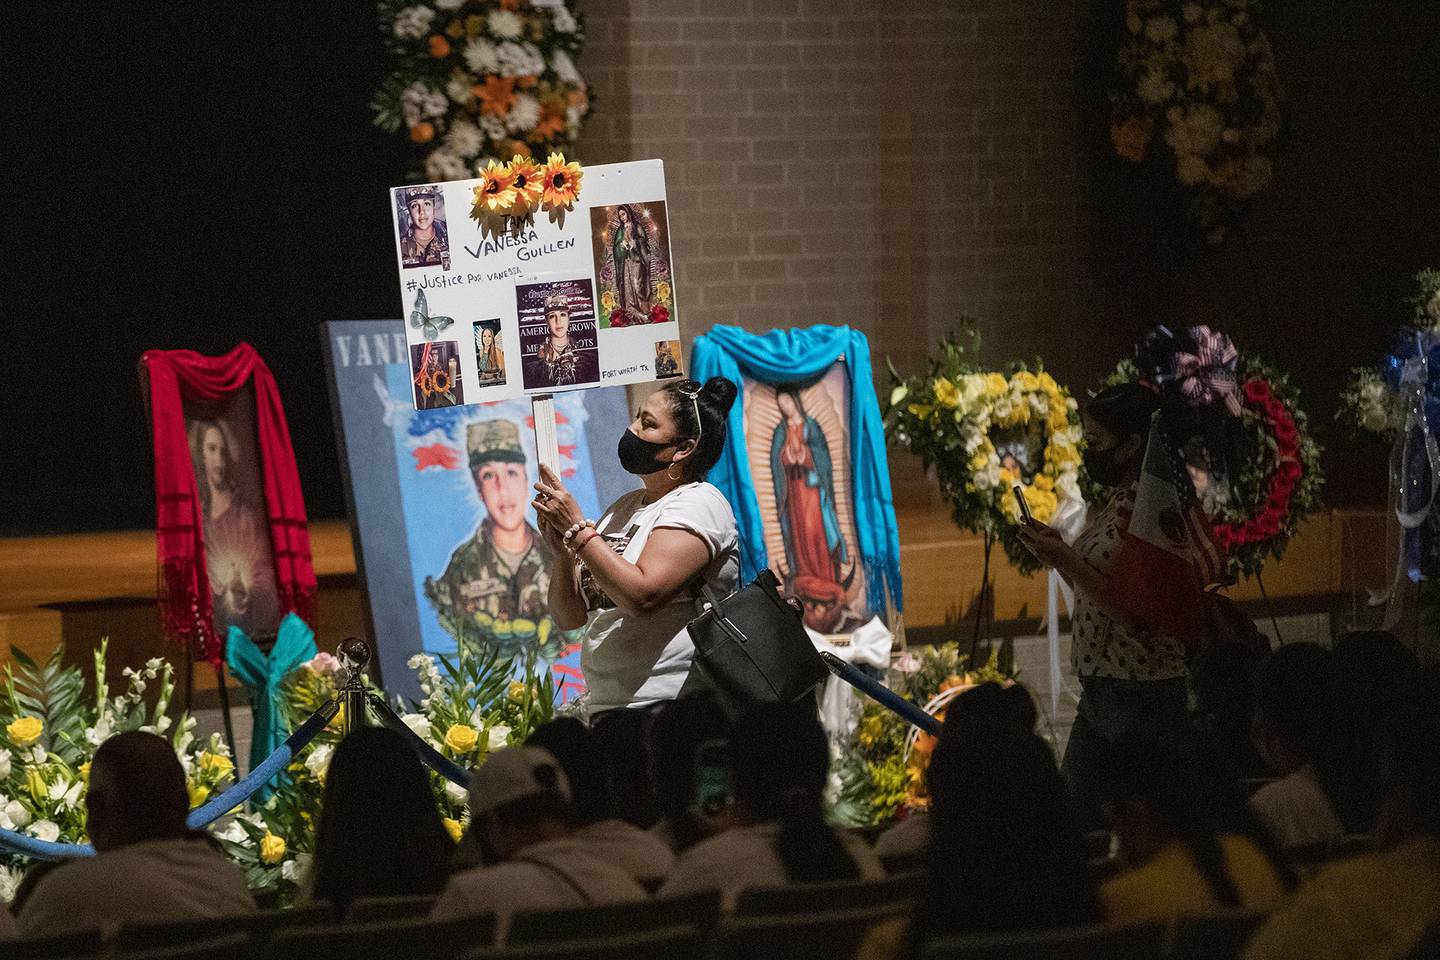 Rosa Samaniego holds a sign demanding justice for Spc. Vanessa Guillen at a memorial service in honor of the soldier on Friday, Aug. 14, 2020, in Houston.